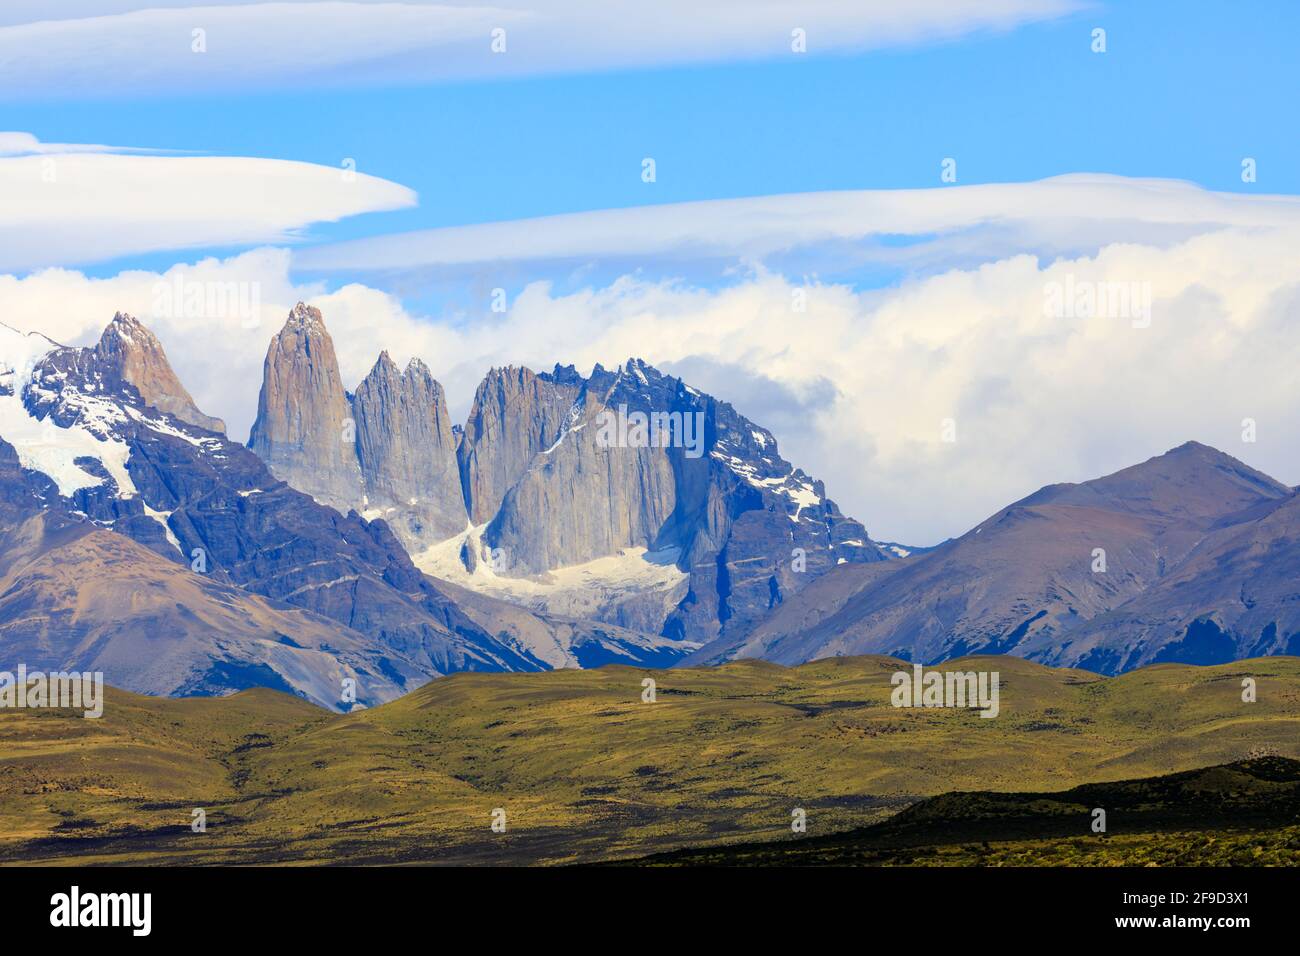 The jagged granite Torres del Paine mountain peaks and towers in Torres del Paine National Park, Patagonia, southern Chile, viewed over Lake Sarmiento Stock Photo